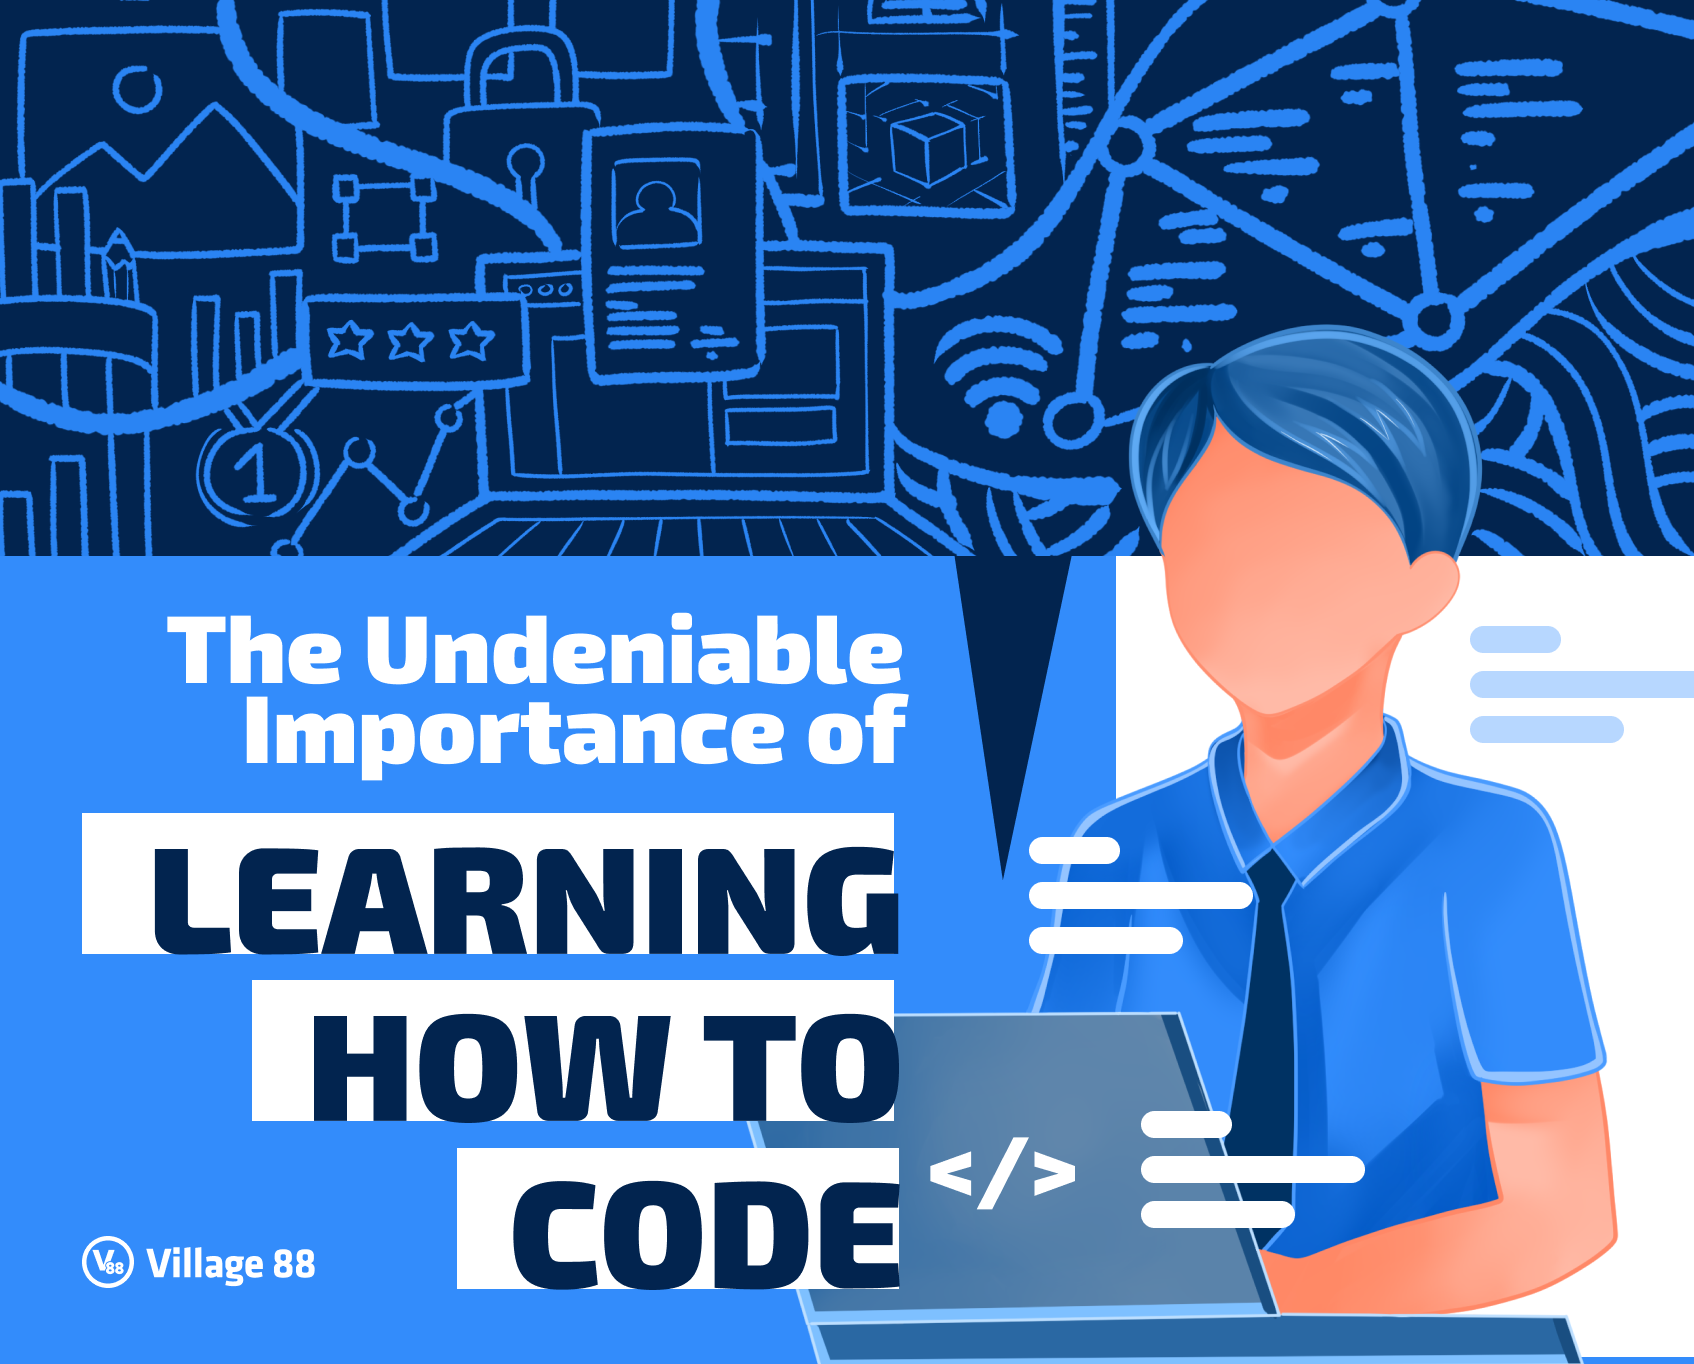 The Undeniable Importance of Learning How to Code